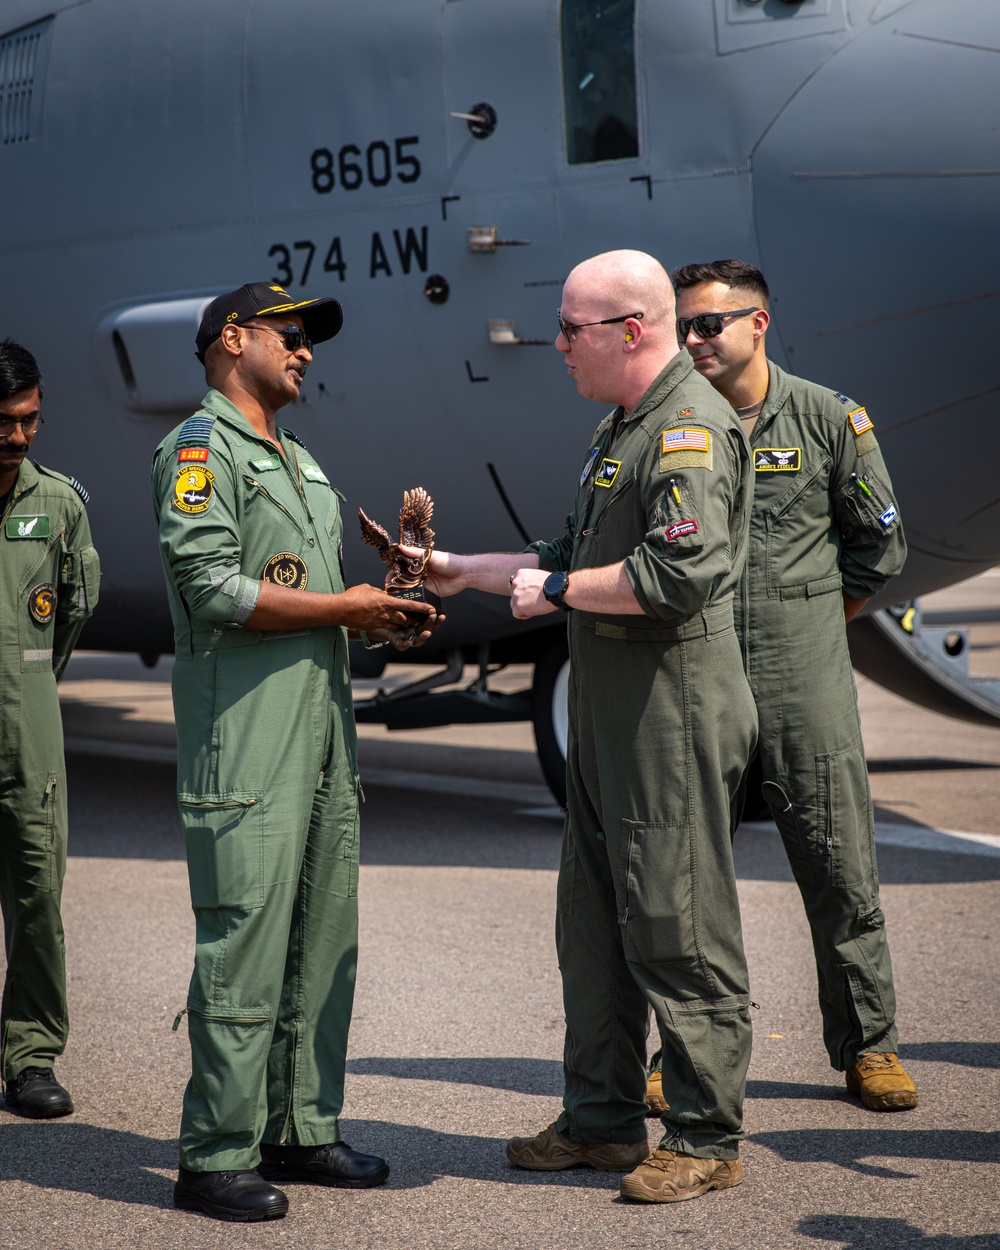 U.S. and Indian Airmen exchange gifts during Exercise Tiger TRIUMPH